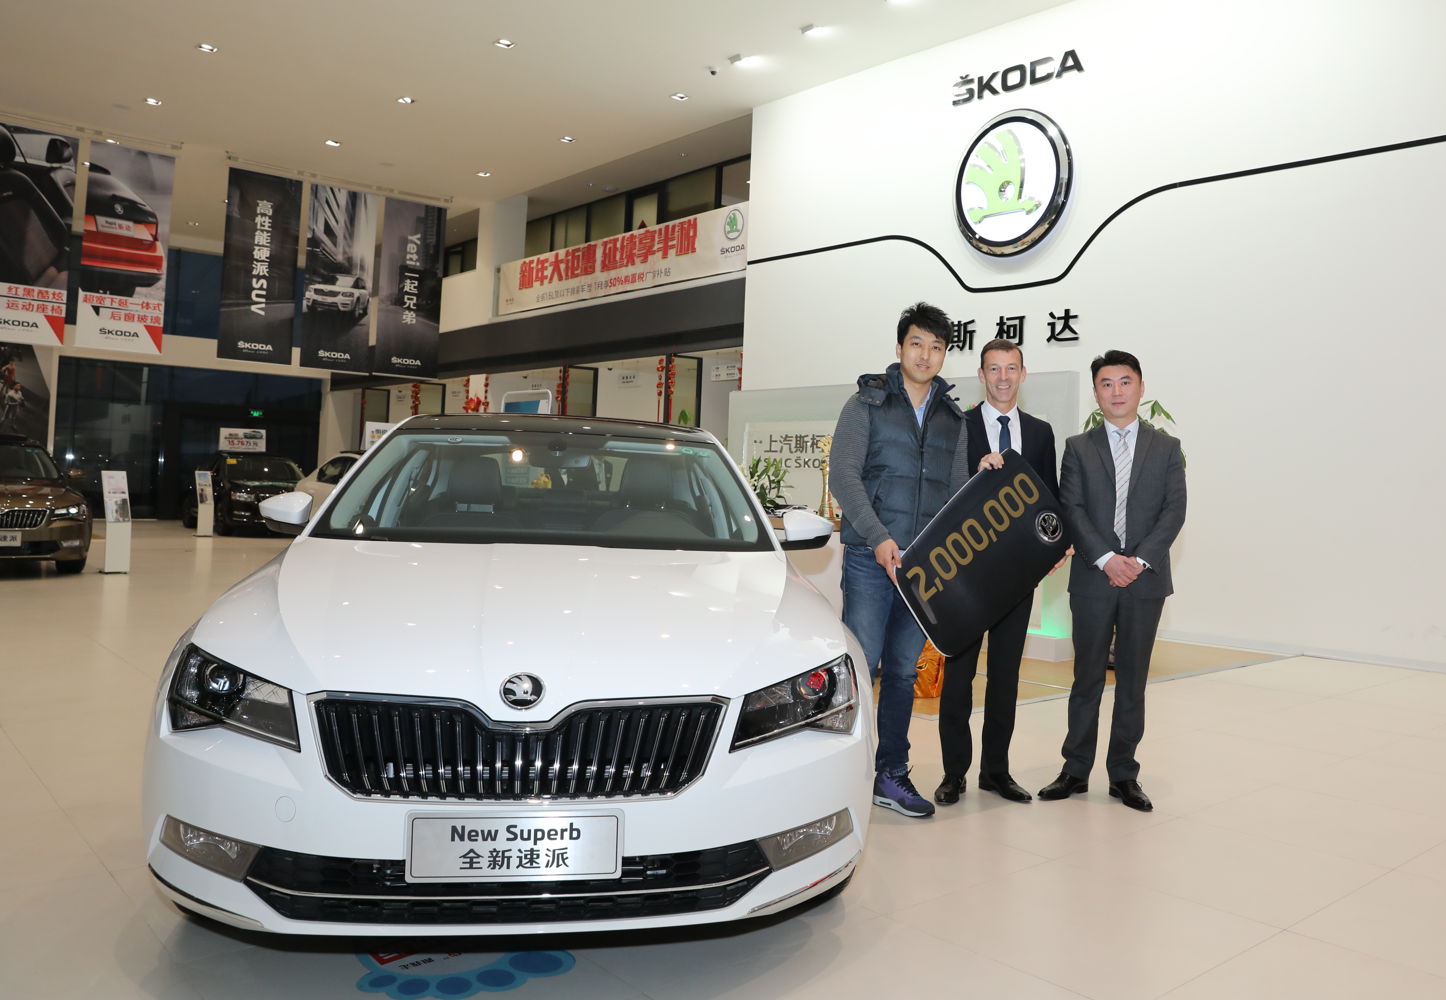 The milestone vehicle is a ŠKODA SUPERB with a 1.4 TSI petrol engine in Polar White. Werner Eichhorn, ŠKODA Board Member for Sales and Marketing, handed over the brand’s flagship to customer Li Hongan in Shanghai.